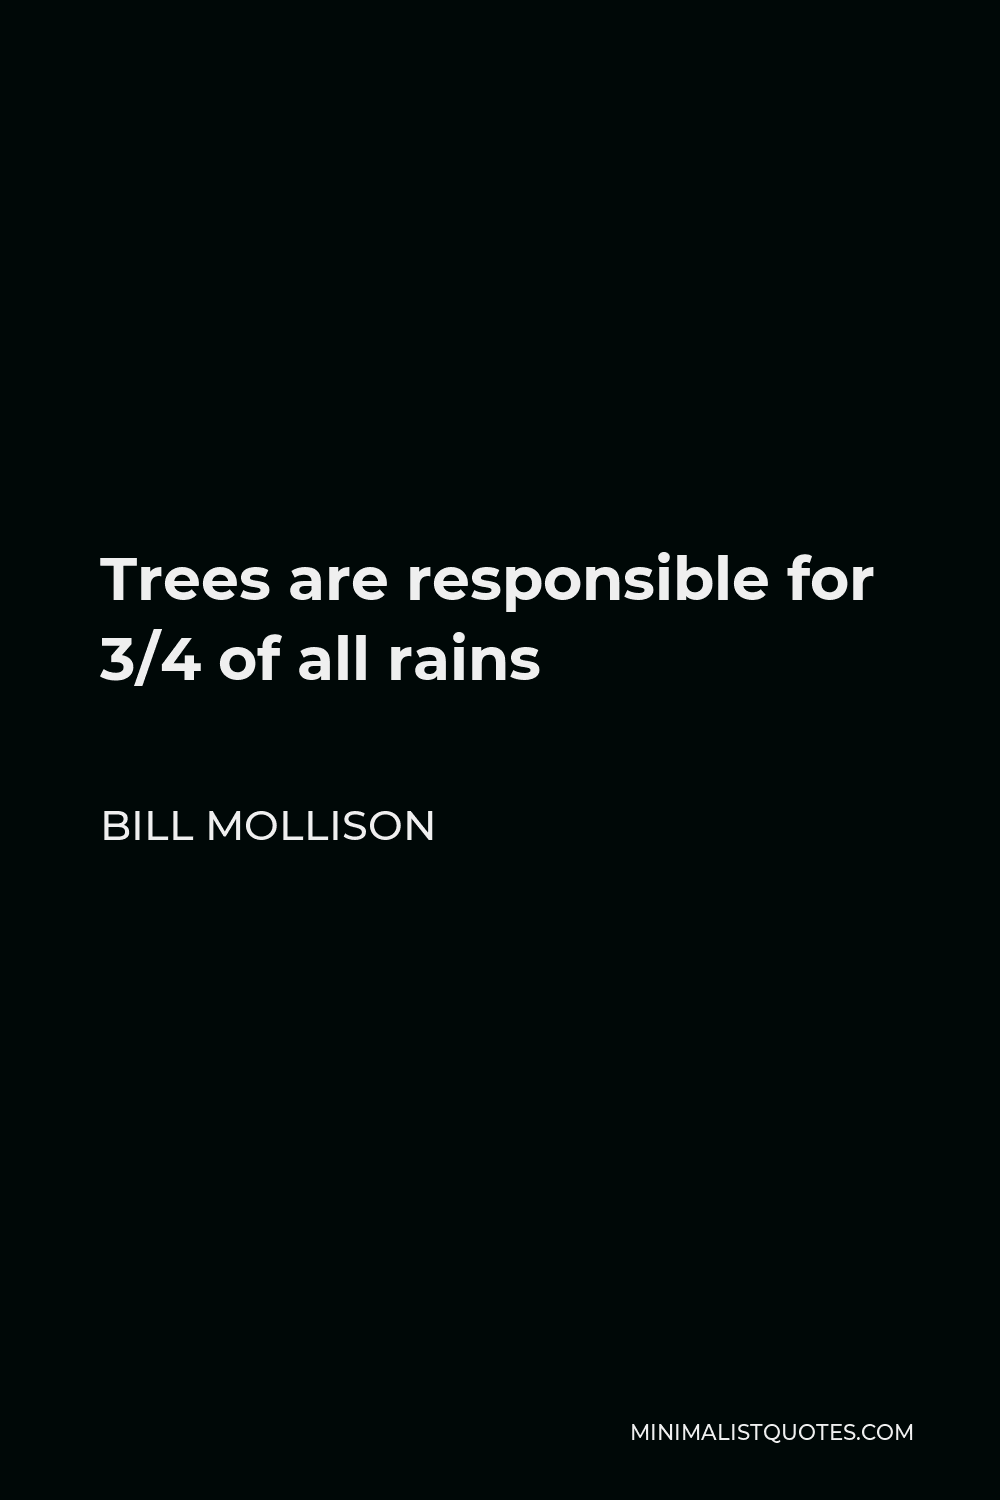 Bill Mollison Quote - Trees are responsible for 3/4 of all rains